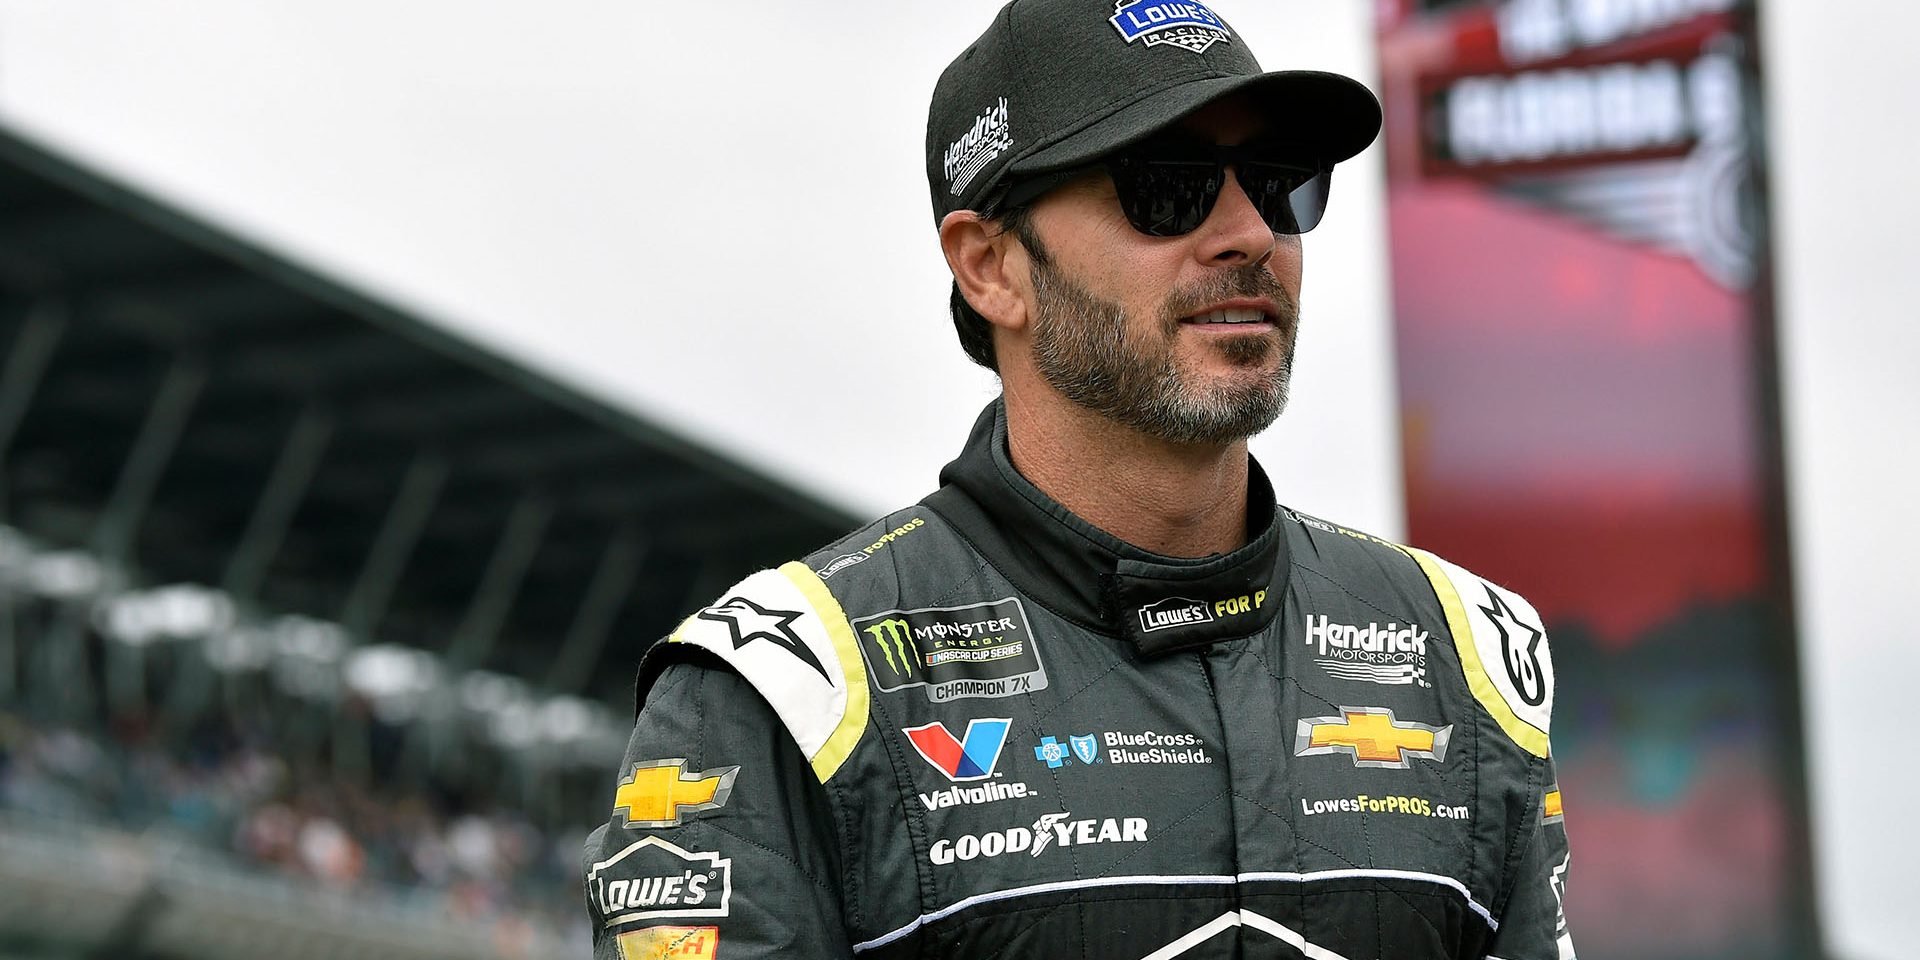 What Years Did Jimmie Johnson Win NASCAR Championships